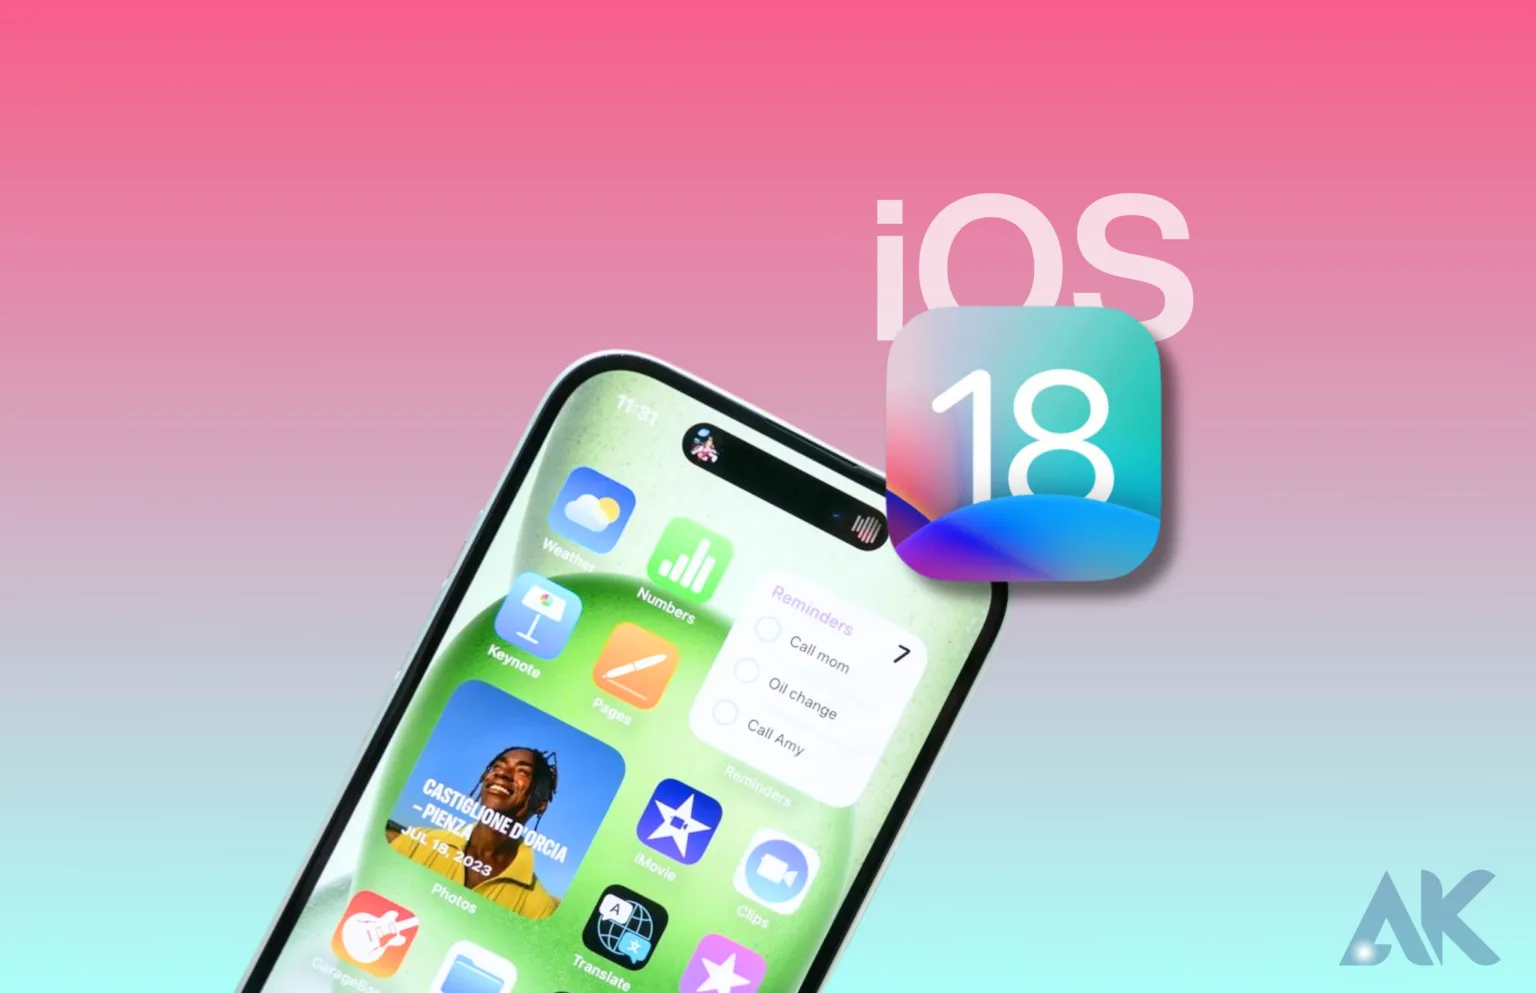 iOS 18 Compatibility: Will Your iPhone Be Compatible?